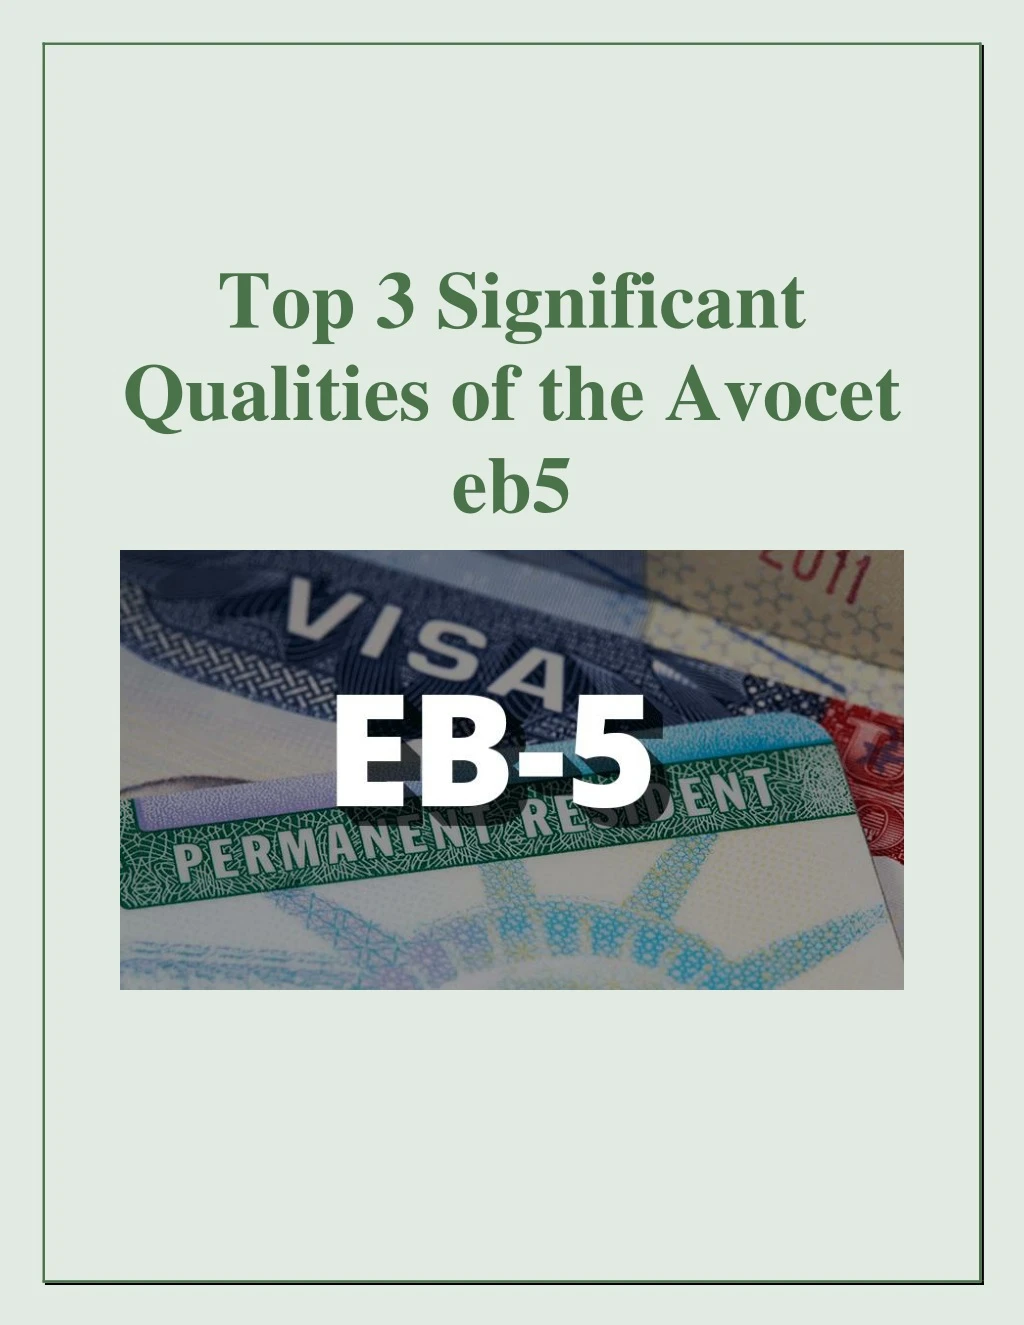 top 3 significant qualities of the avocet eb5